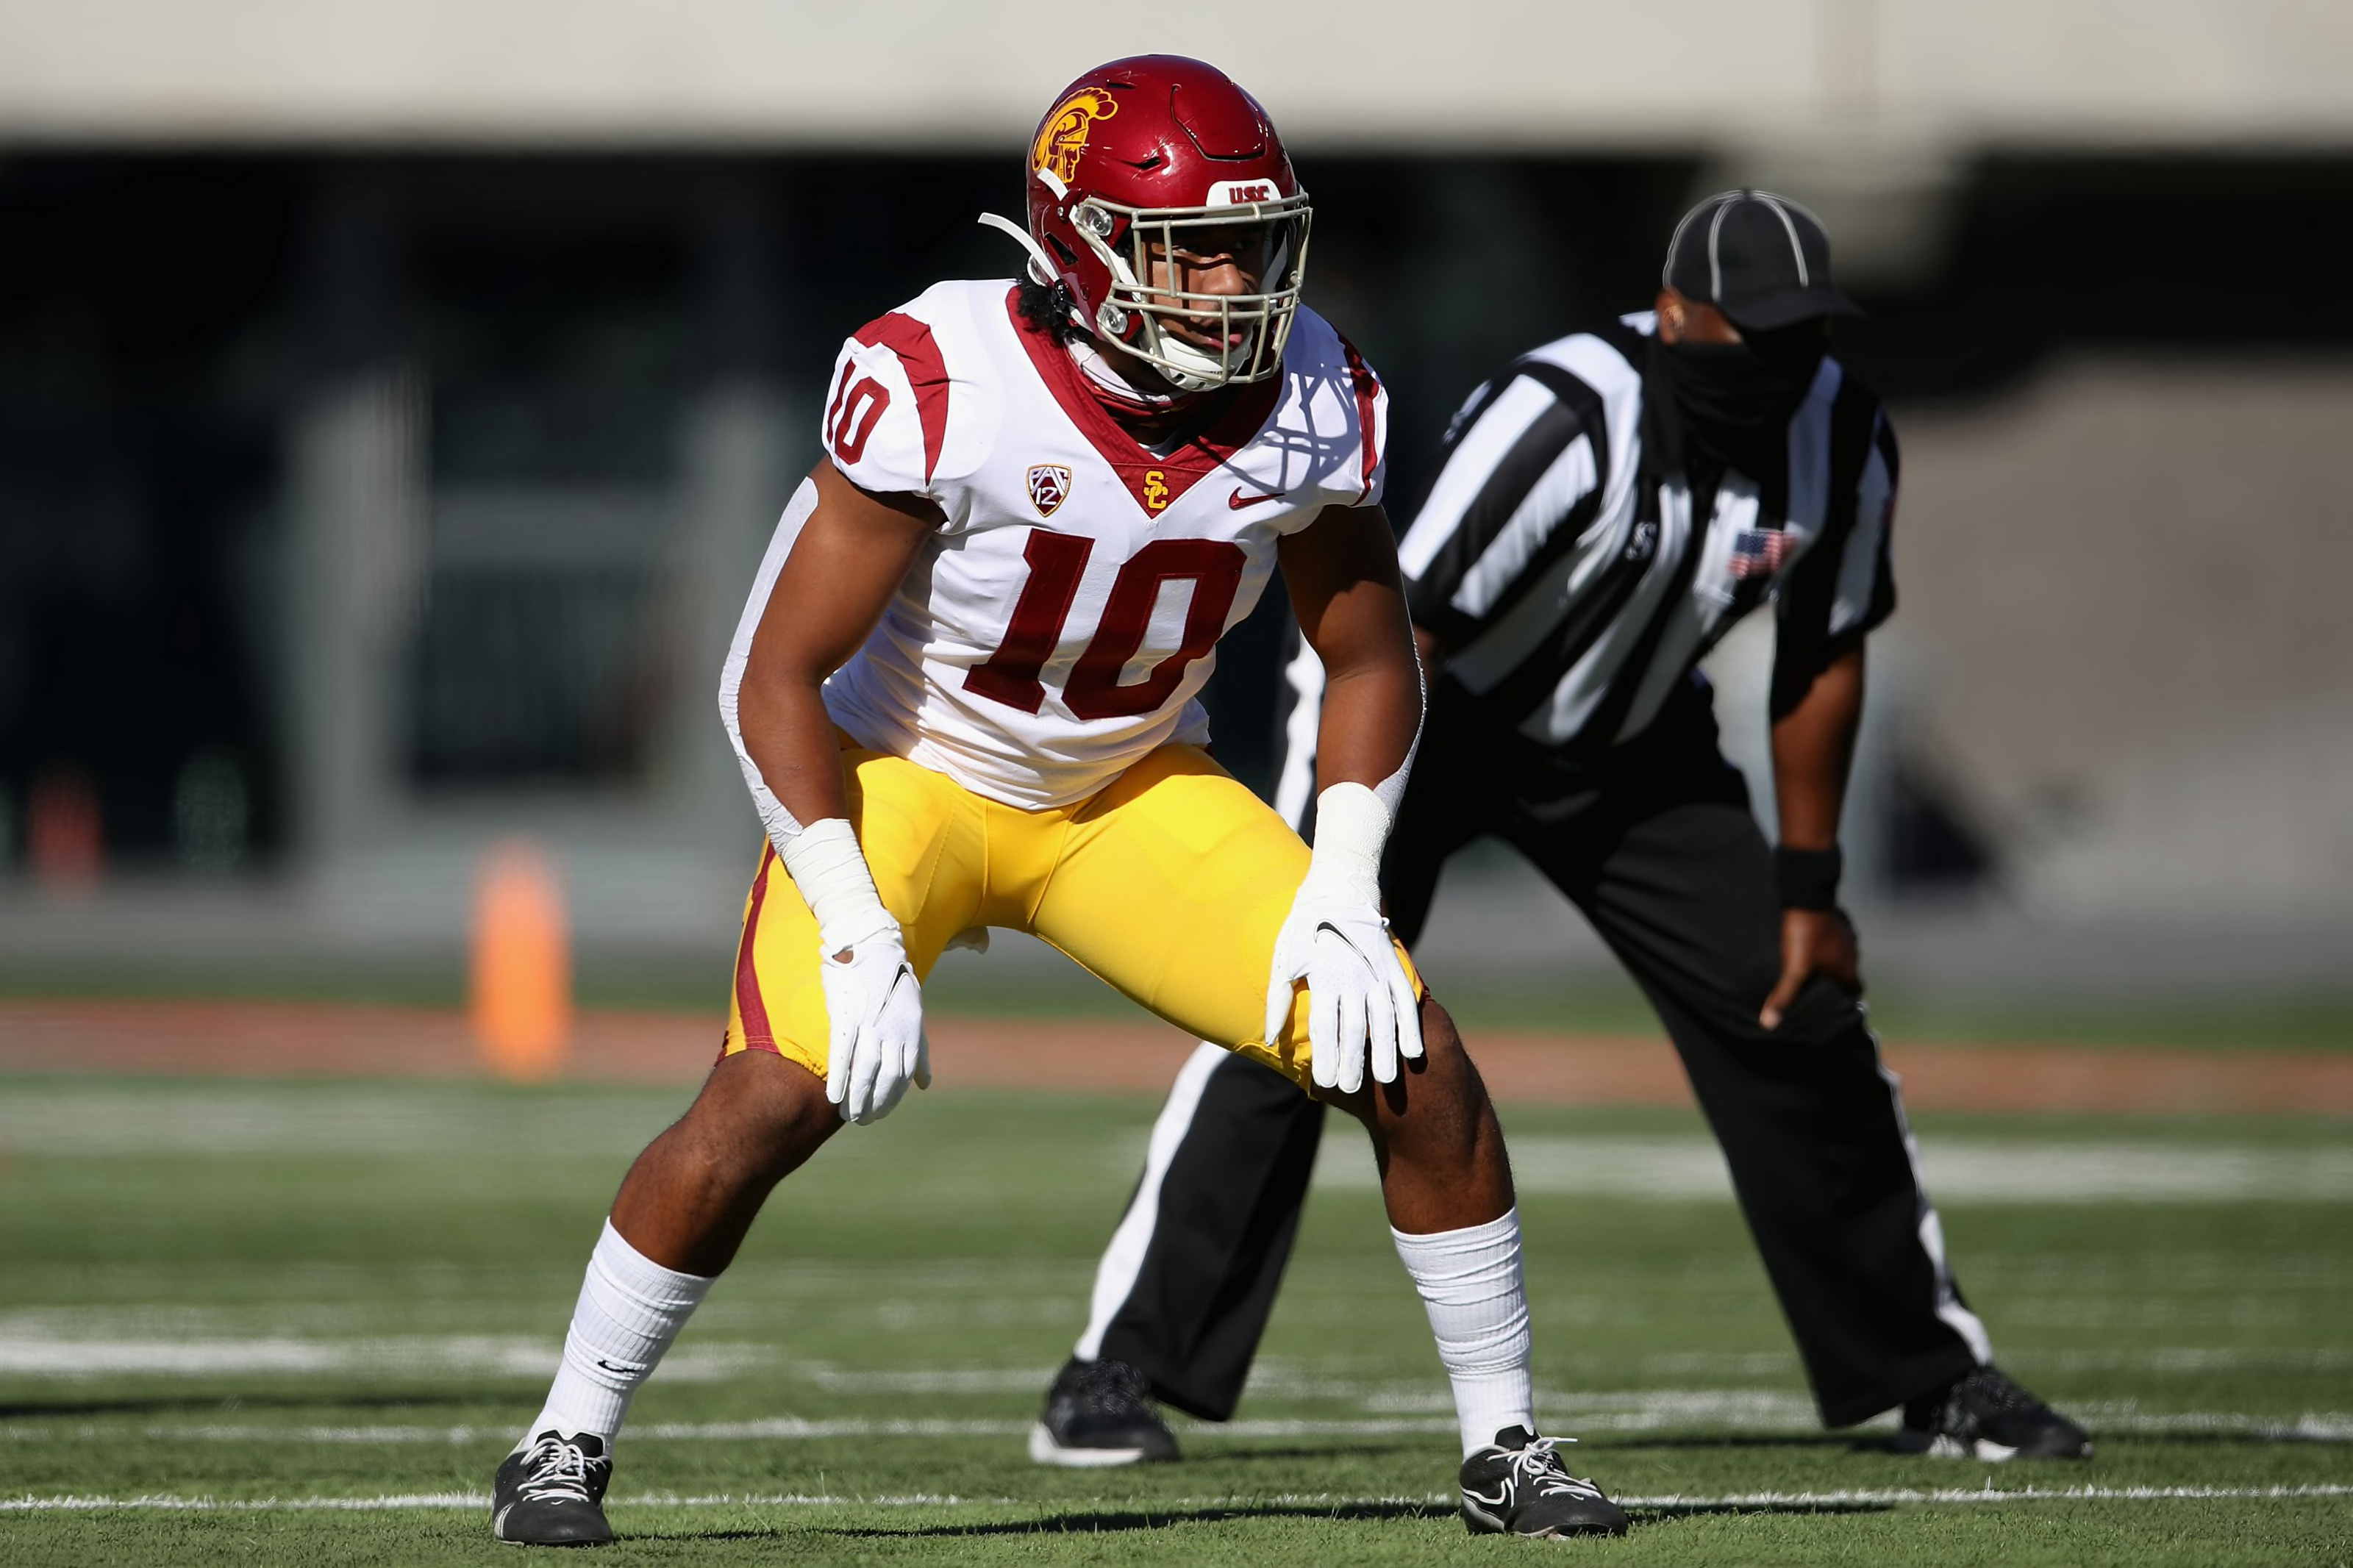 USC Football: Way-too-early 2022 depth chart projection - Page 8